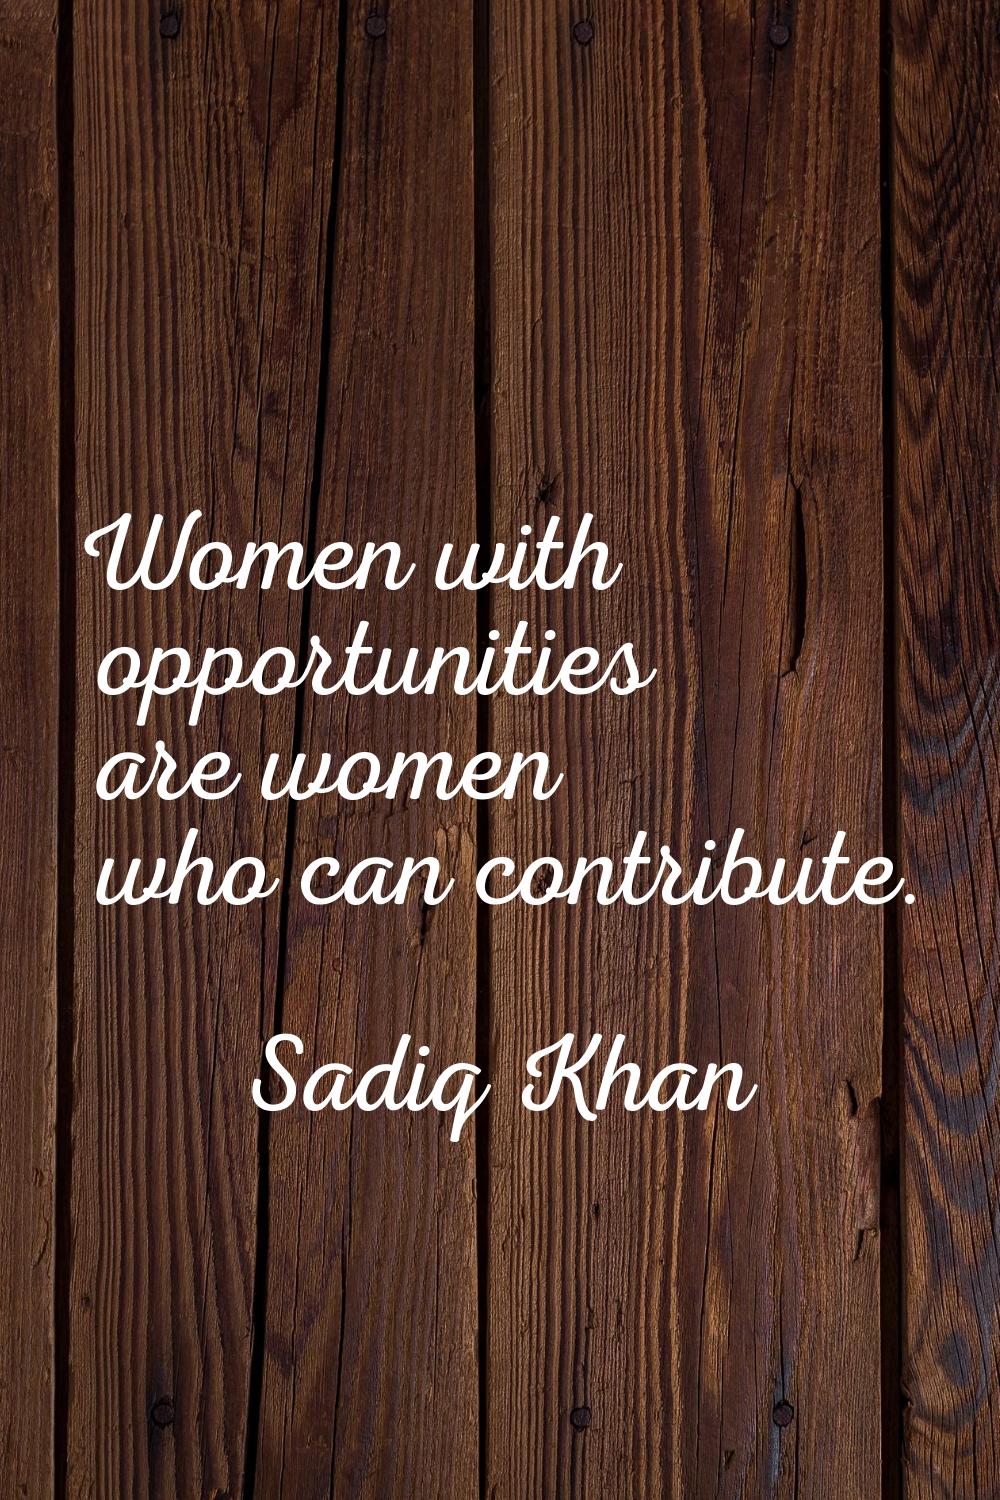 Women with opportunities are women who can contribute.